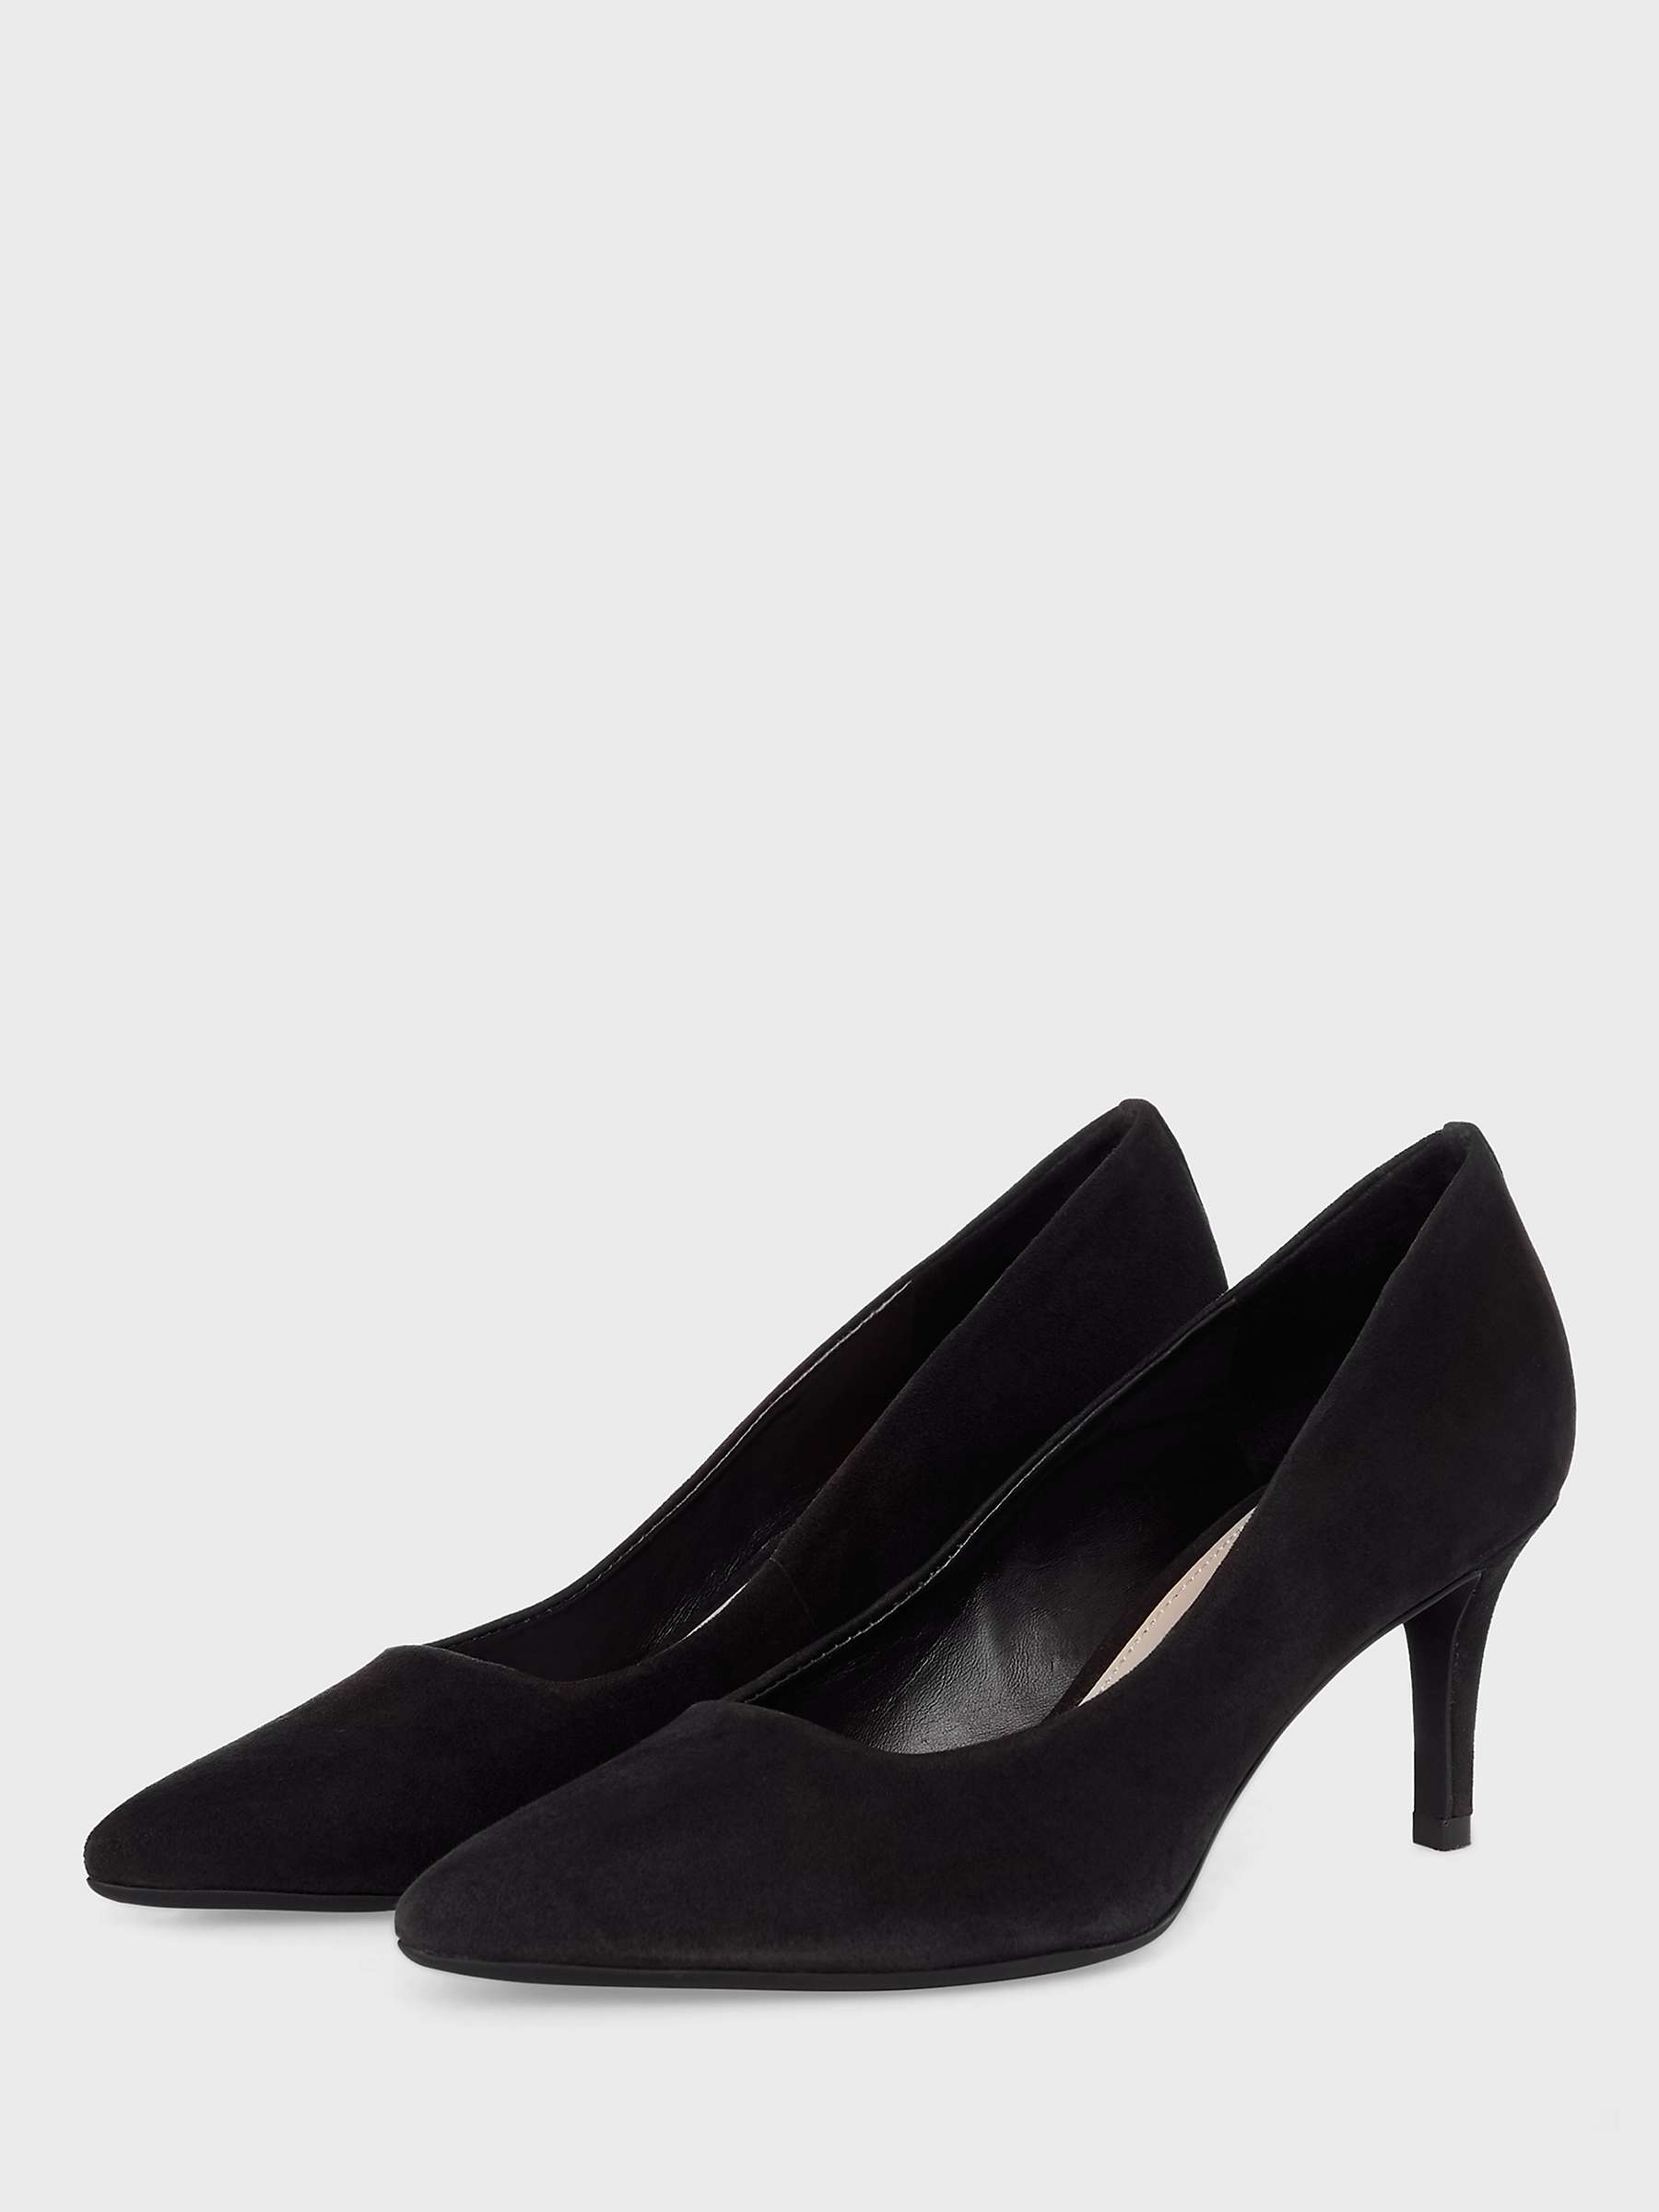 Buy Hobbs Amy Suede Court Shoes, Black Online at johnlewis.com